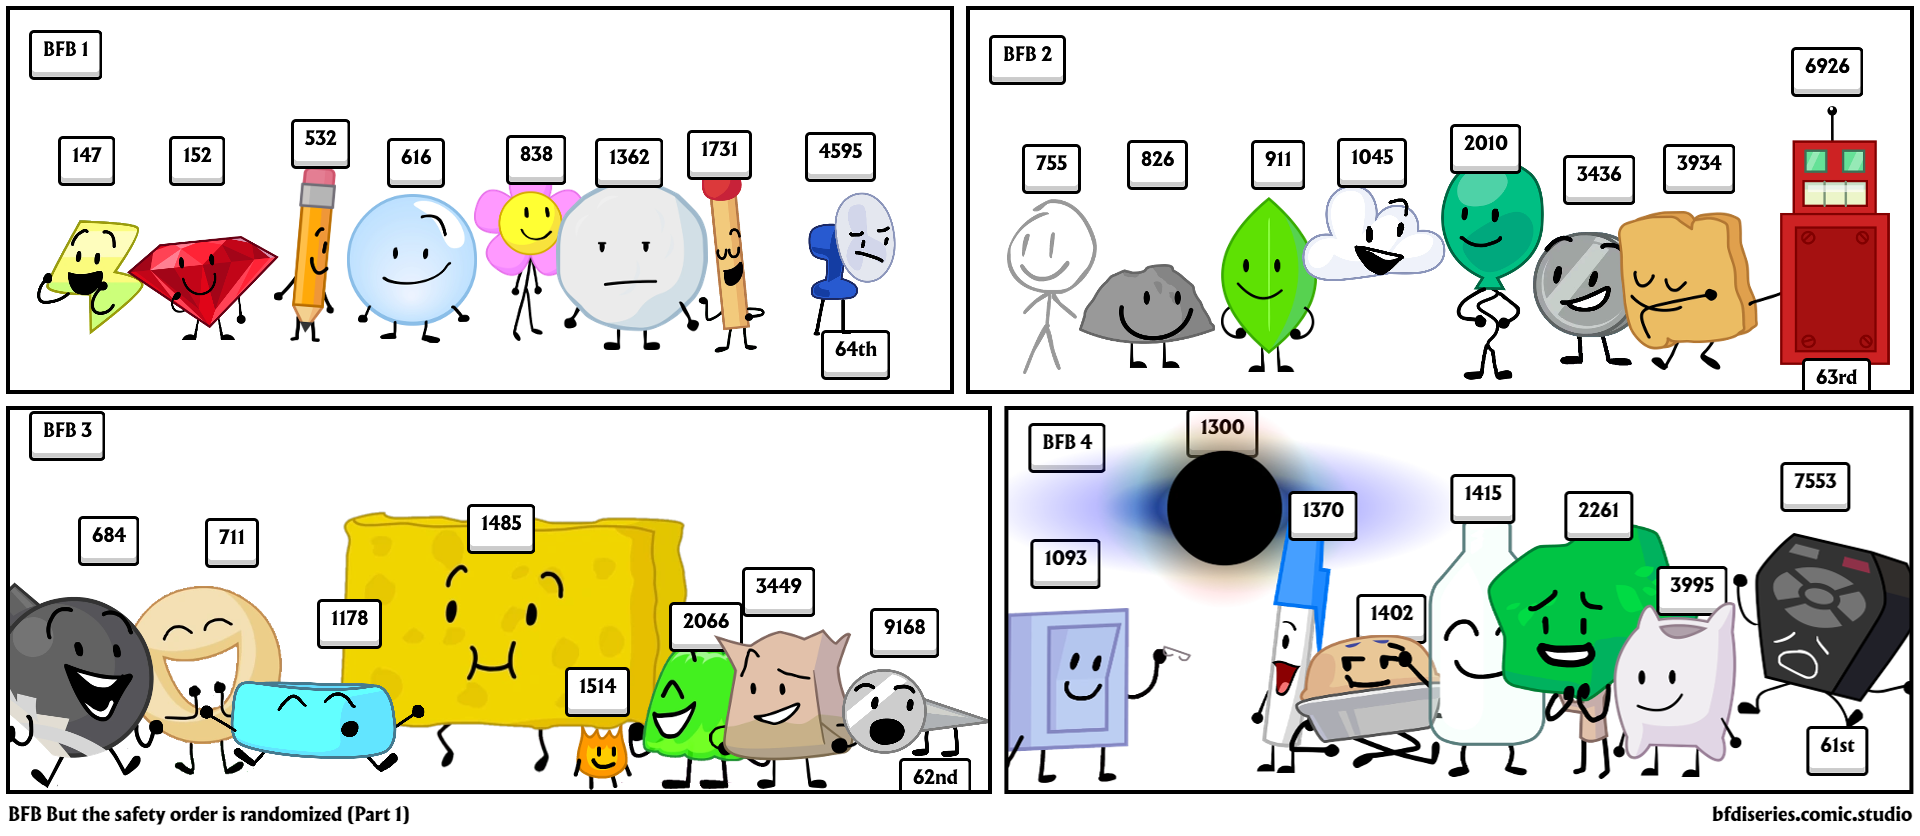 BFB But the safety order is randomized (Part 1)